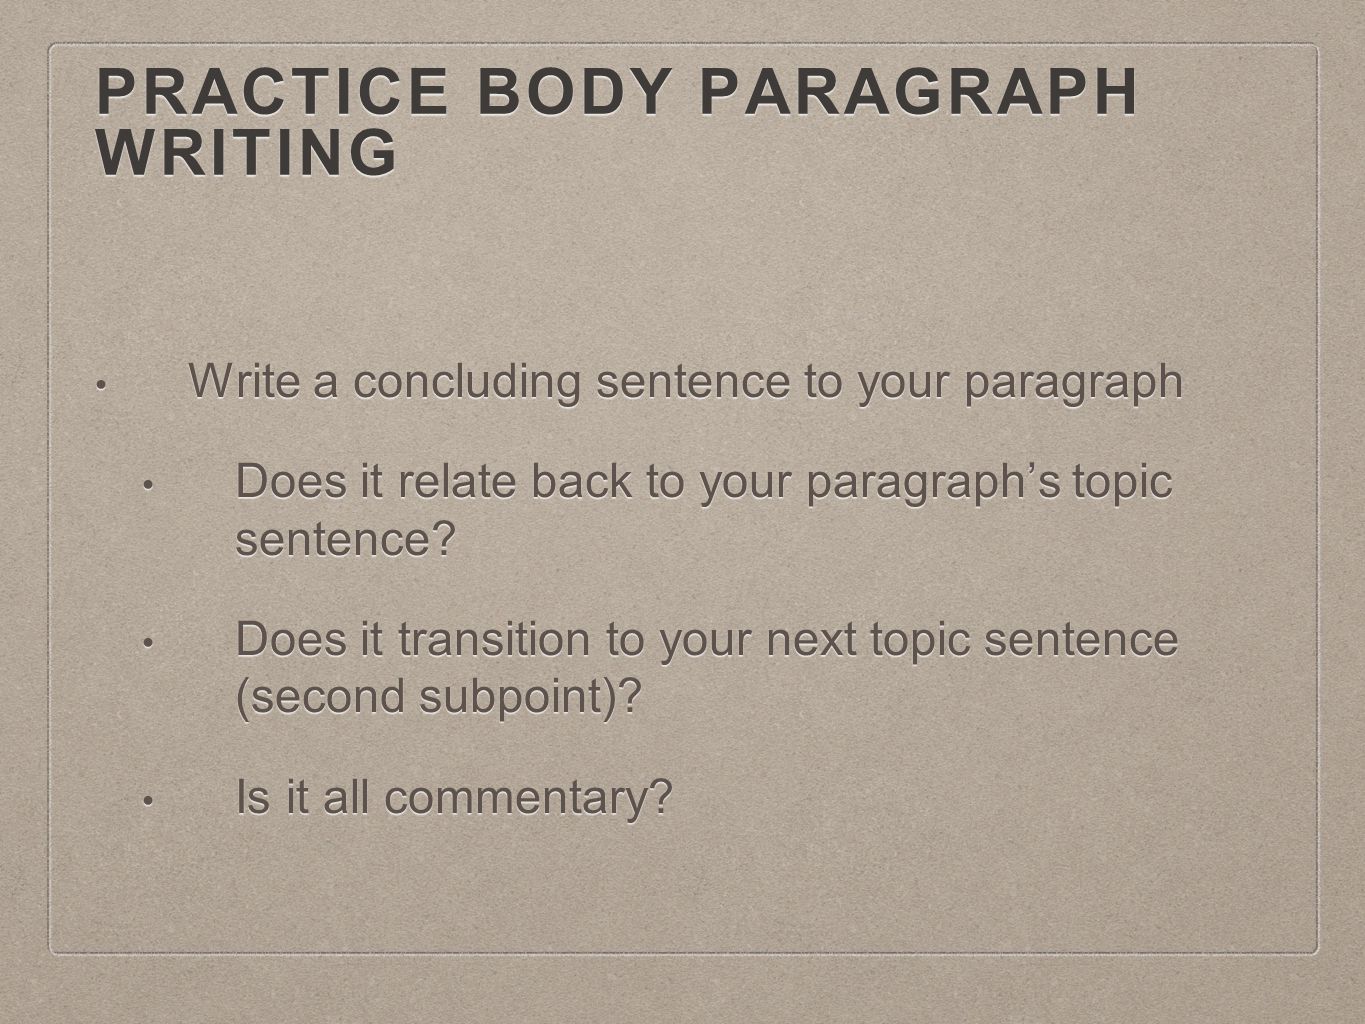 Practice Body Paragraph Writing